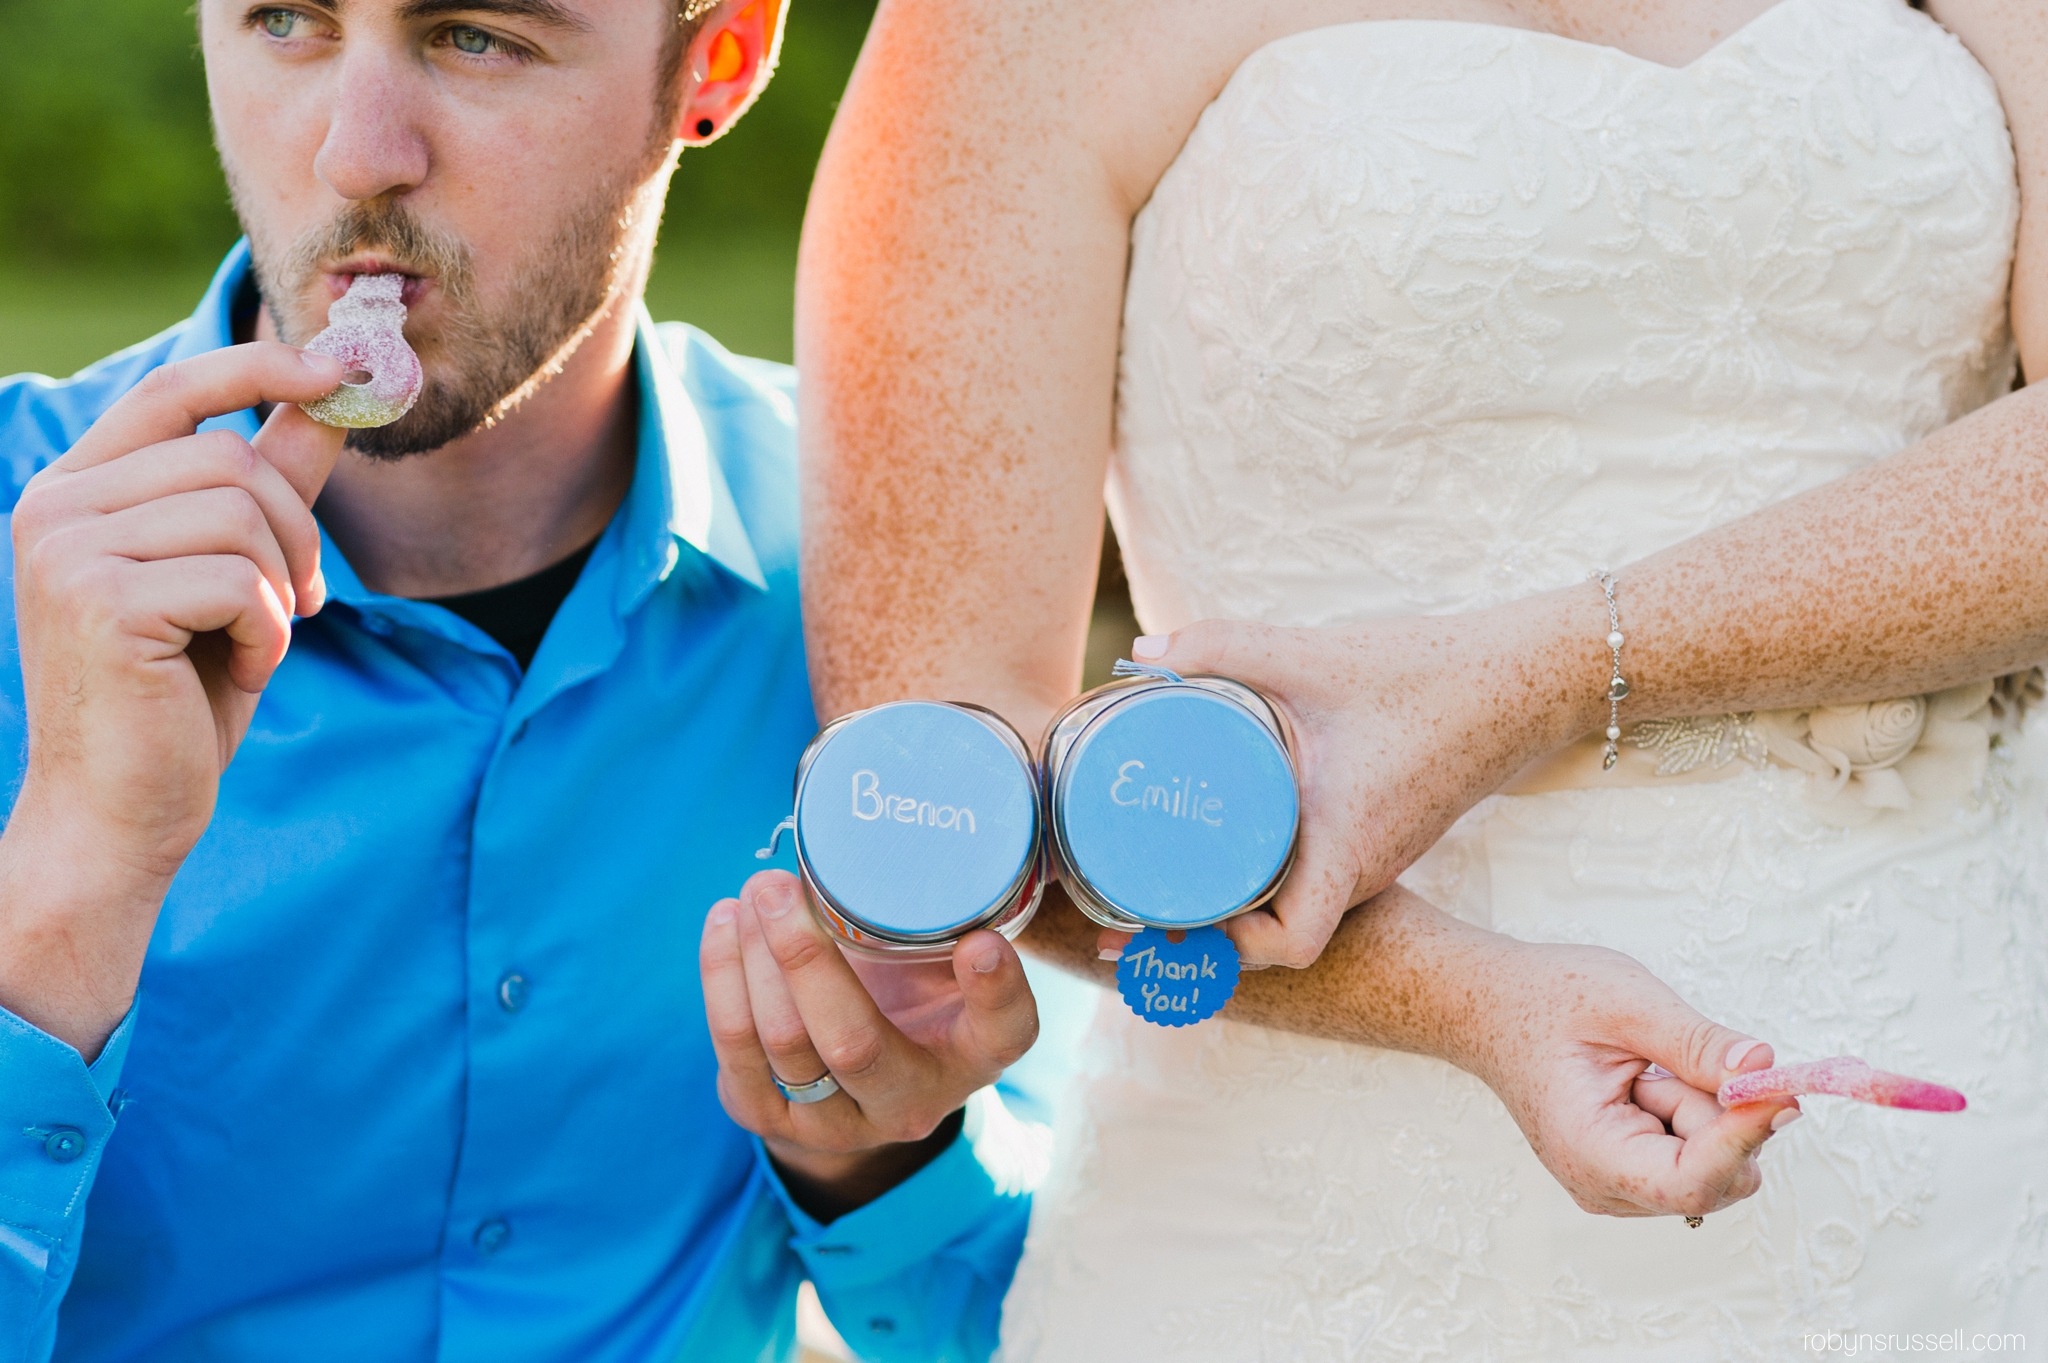 60-take-away-candy-jars-from-bride-and-groom.jpg